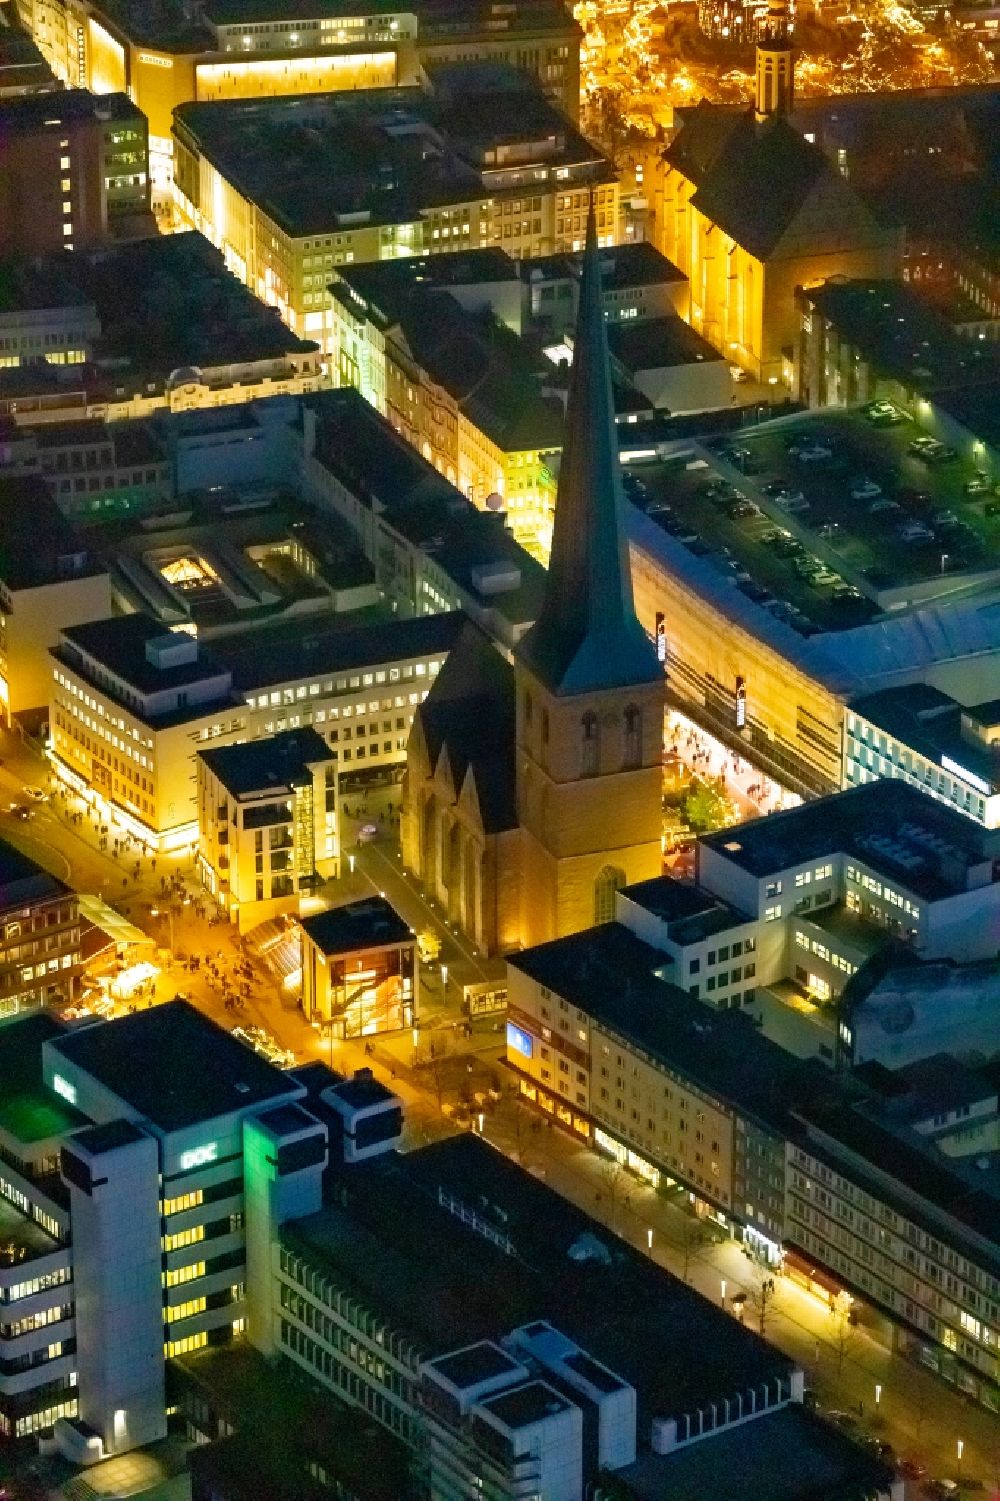 Aerial photograph at night Dortmund - Night lighting church building of the St. Petri Church in Dortmund in the federal state of North Rhine-Westphalia, Germany